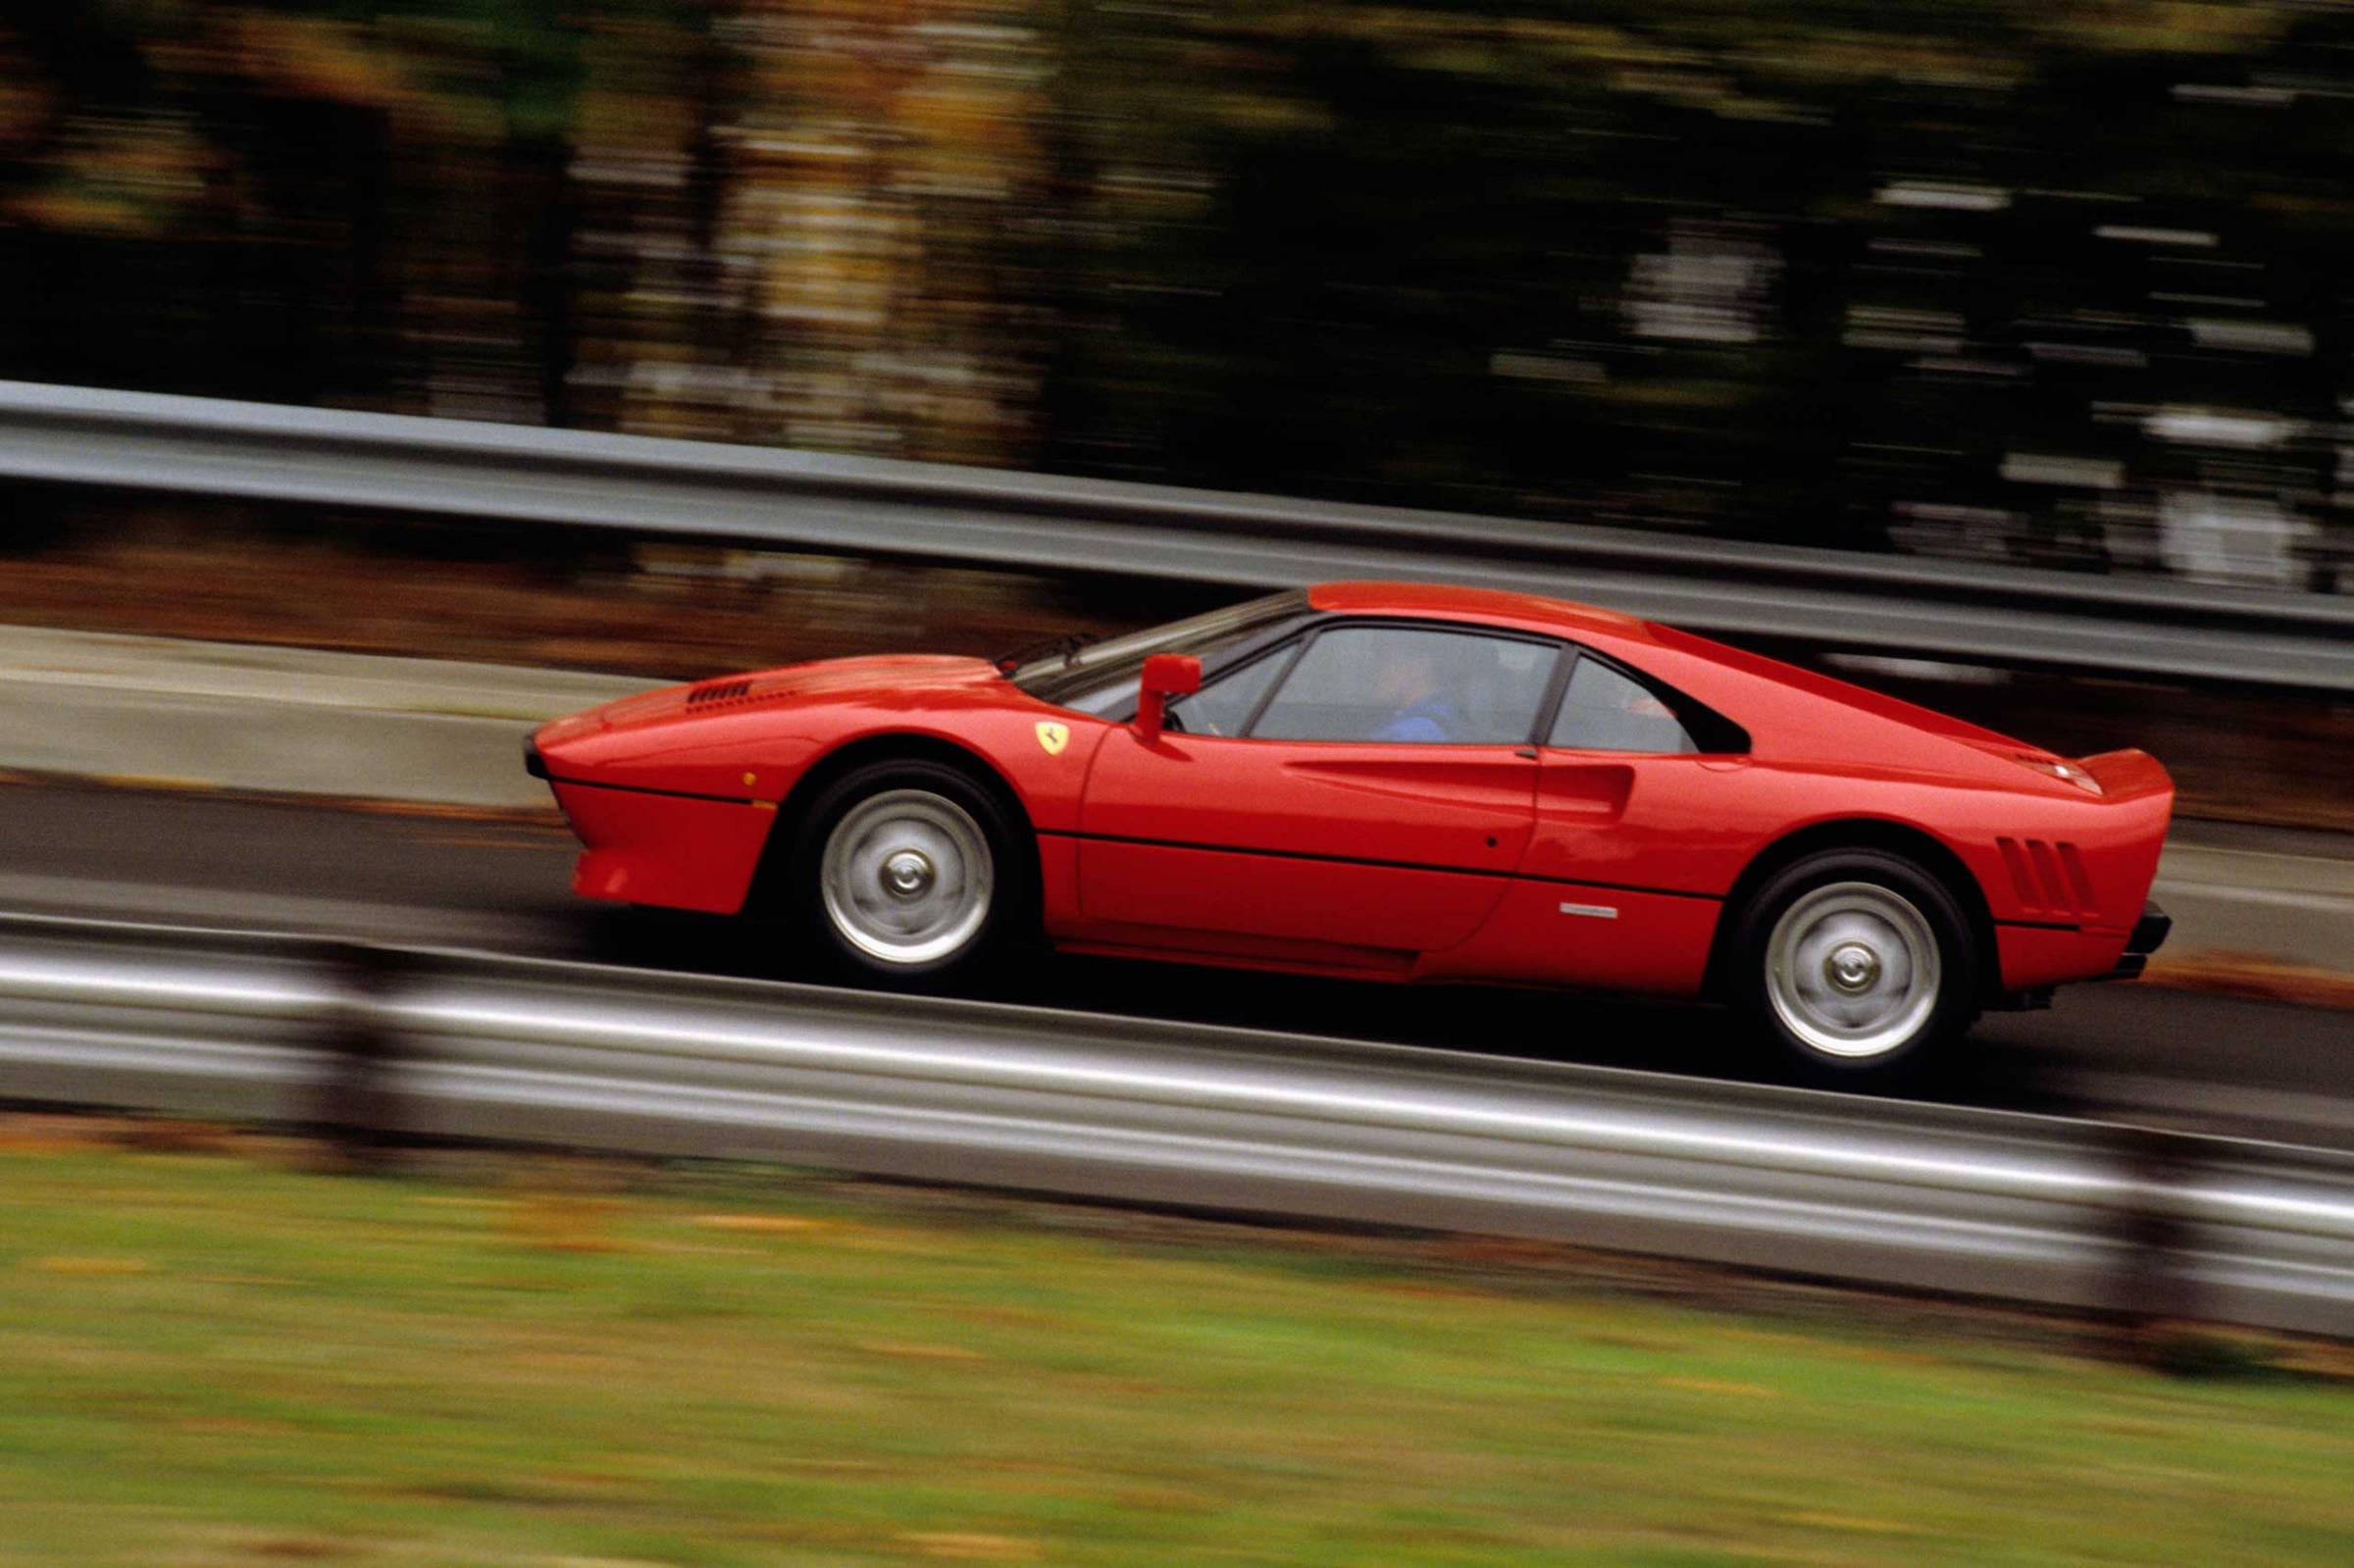 1986 Red Ferrari 288 GTO in speed on road, side view